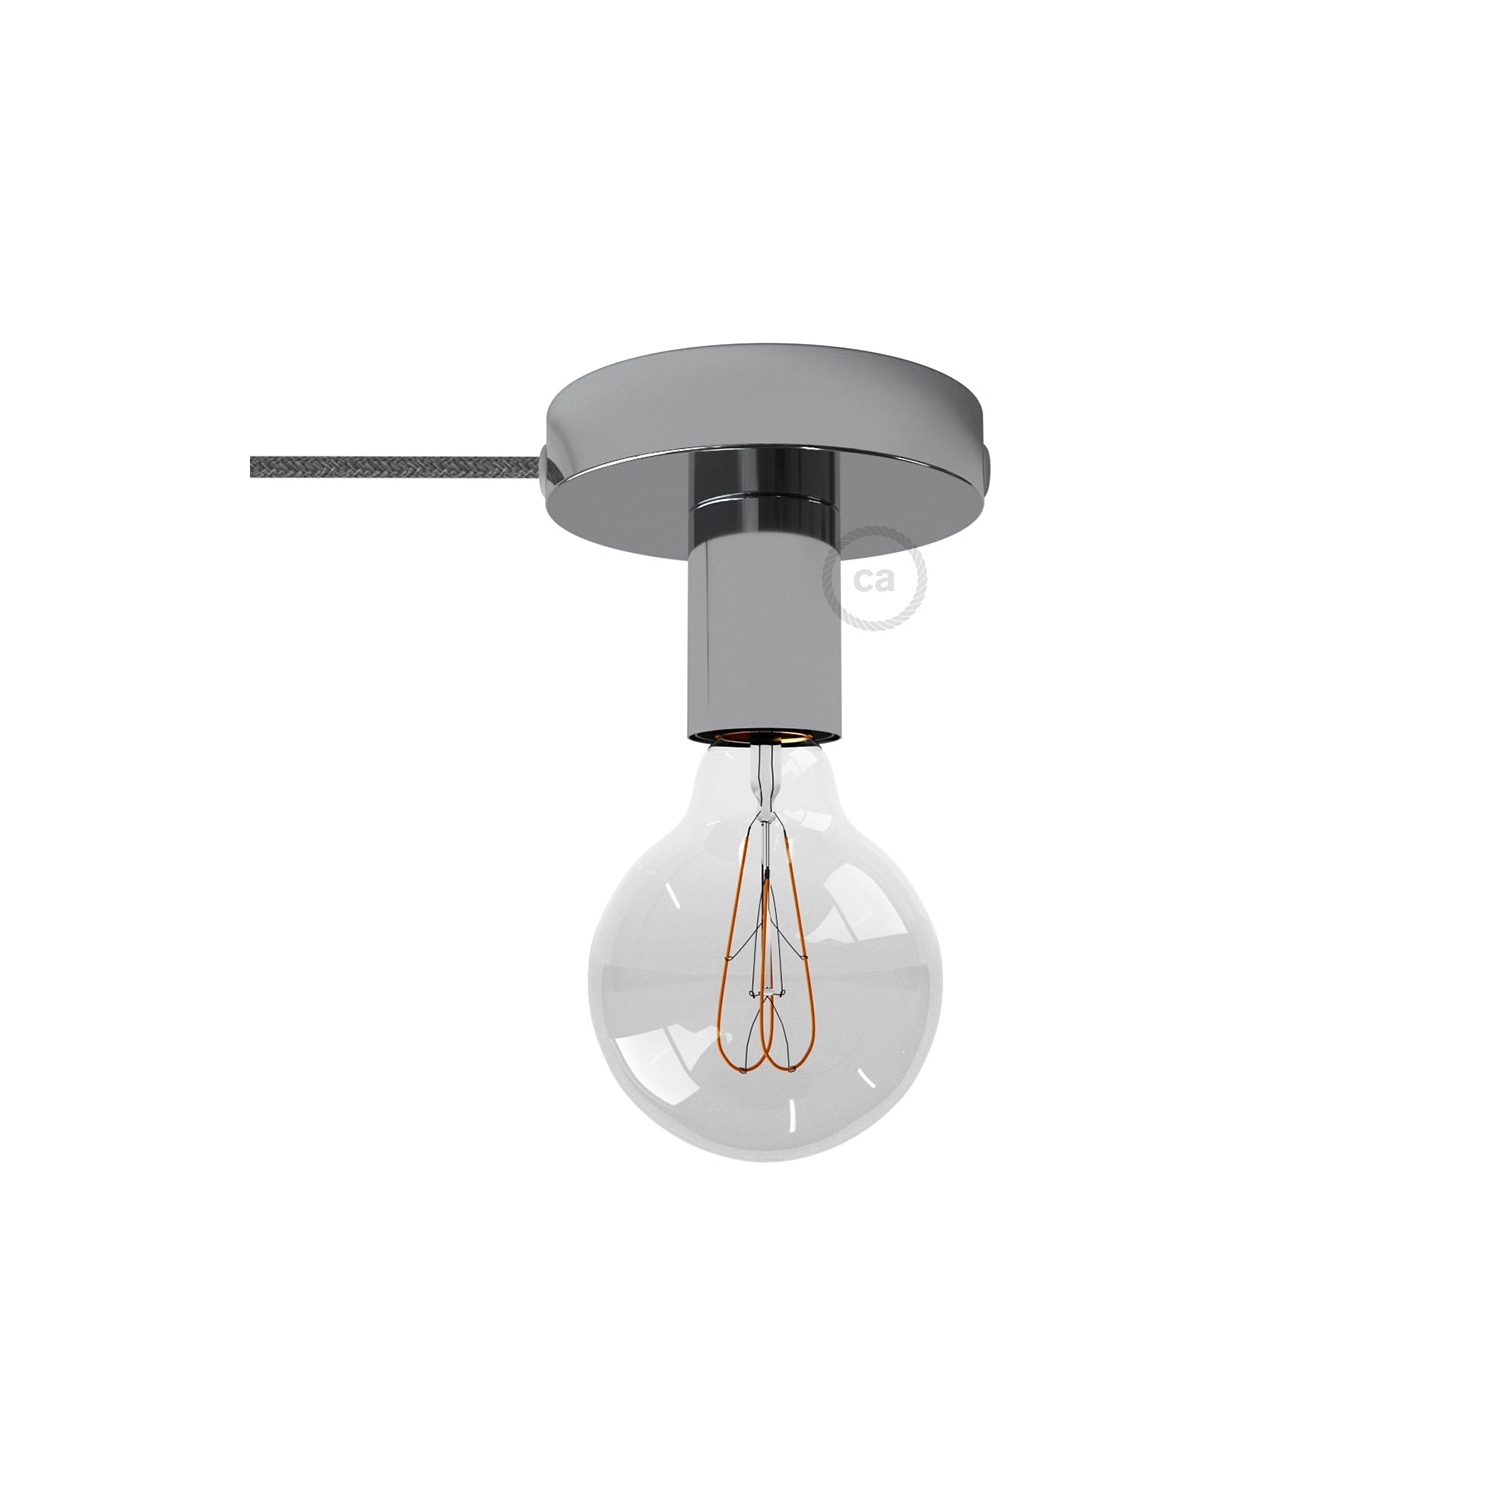 Spostaluce, the chromed metal light source with fabric cable and side holes